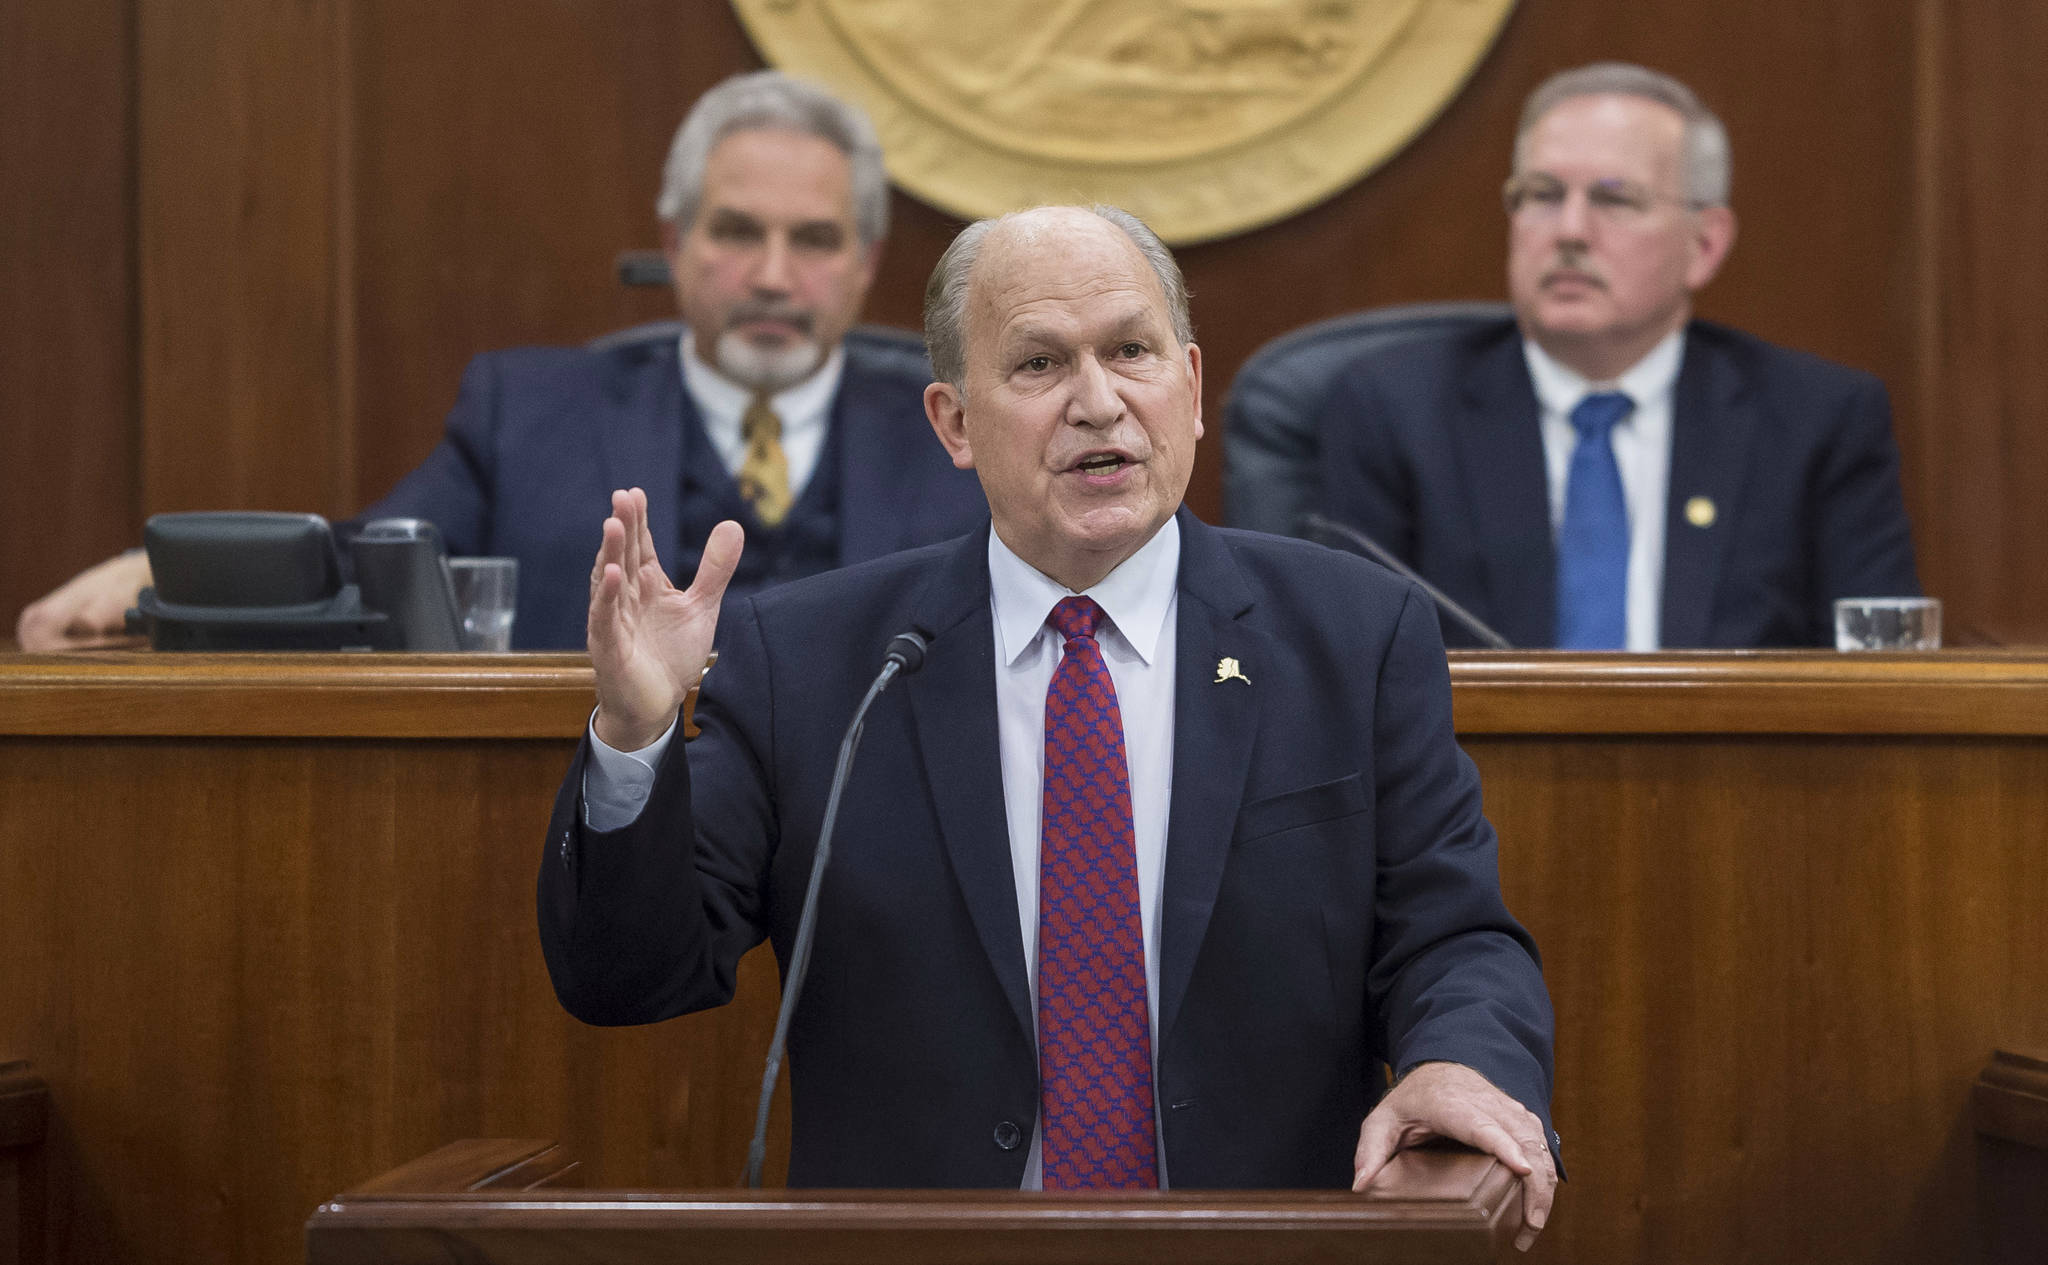 In this Jan. 18 photo, Gov. Bill Walker speaks during his State of the State address before a joint session of the Alaska Legislature at the Capitol. Senate President Pete Kelly, R-Fairbanks, left, and Speaker of the House Bryce Edgmon, D-Dillingham, watch from the Speakers desk in the background. (Michael Penn | Juneau Empire File)